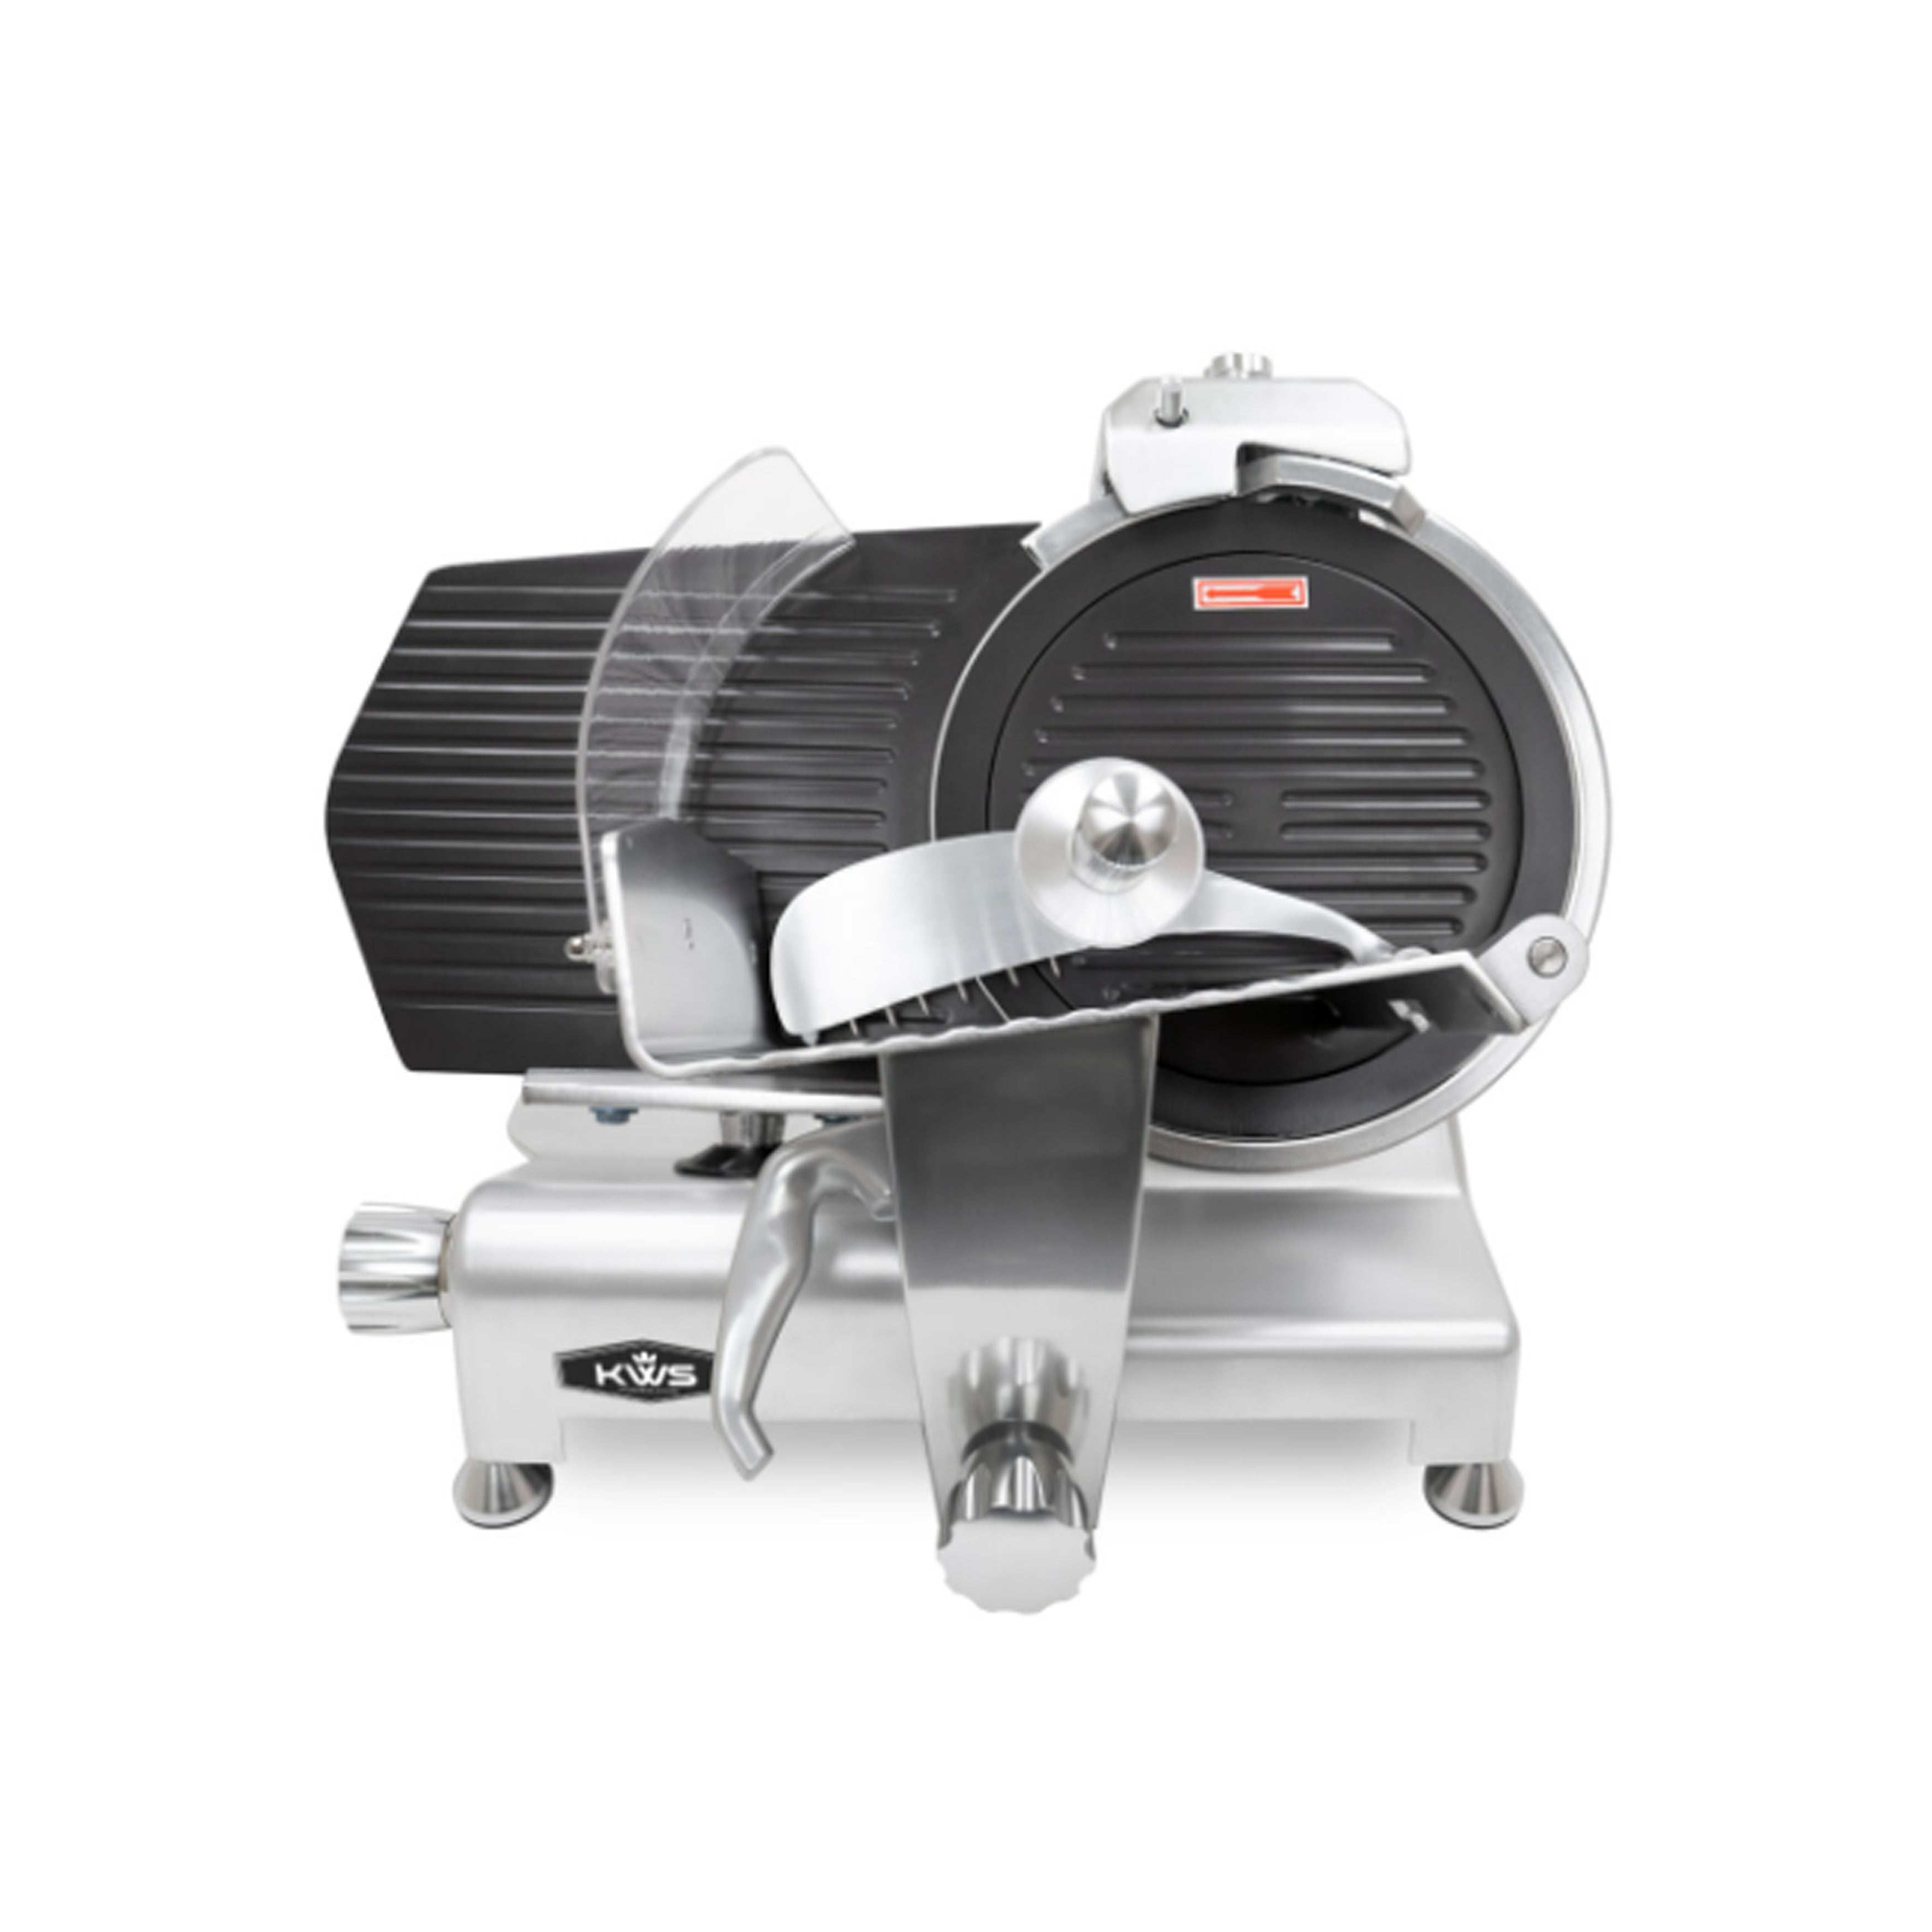 KWS - MS-12ET, Commercial 12″ Metal Collection Electric Meat Slicer with Non-sticky Teflon Blade